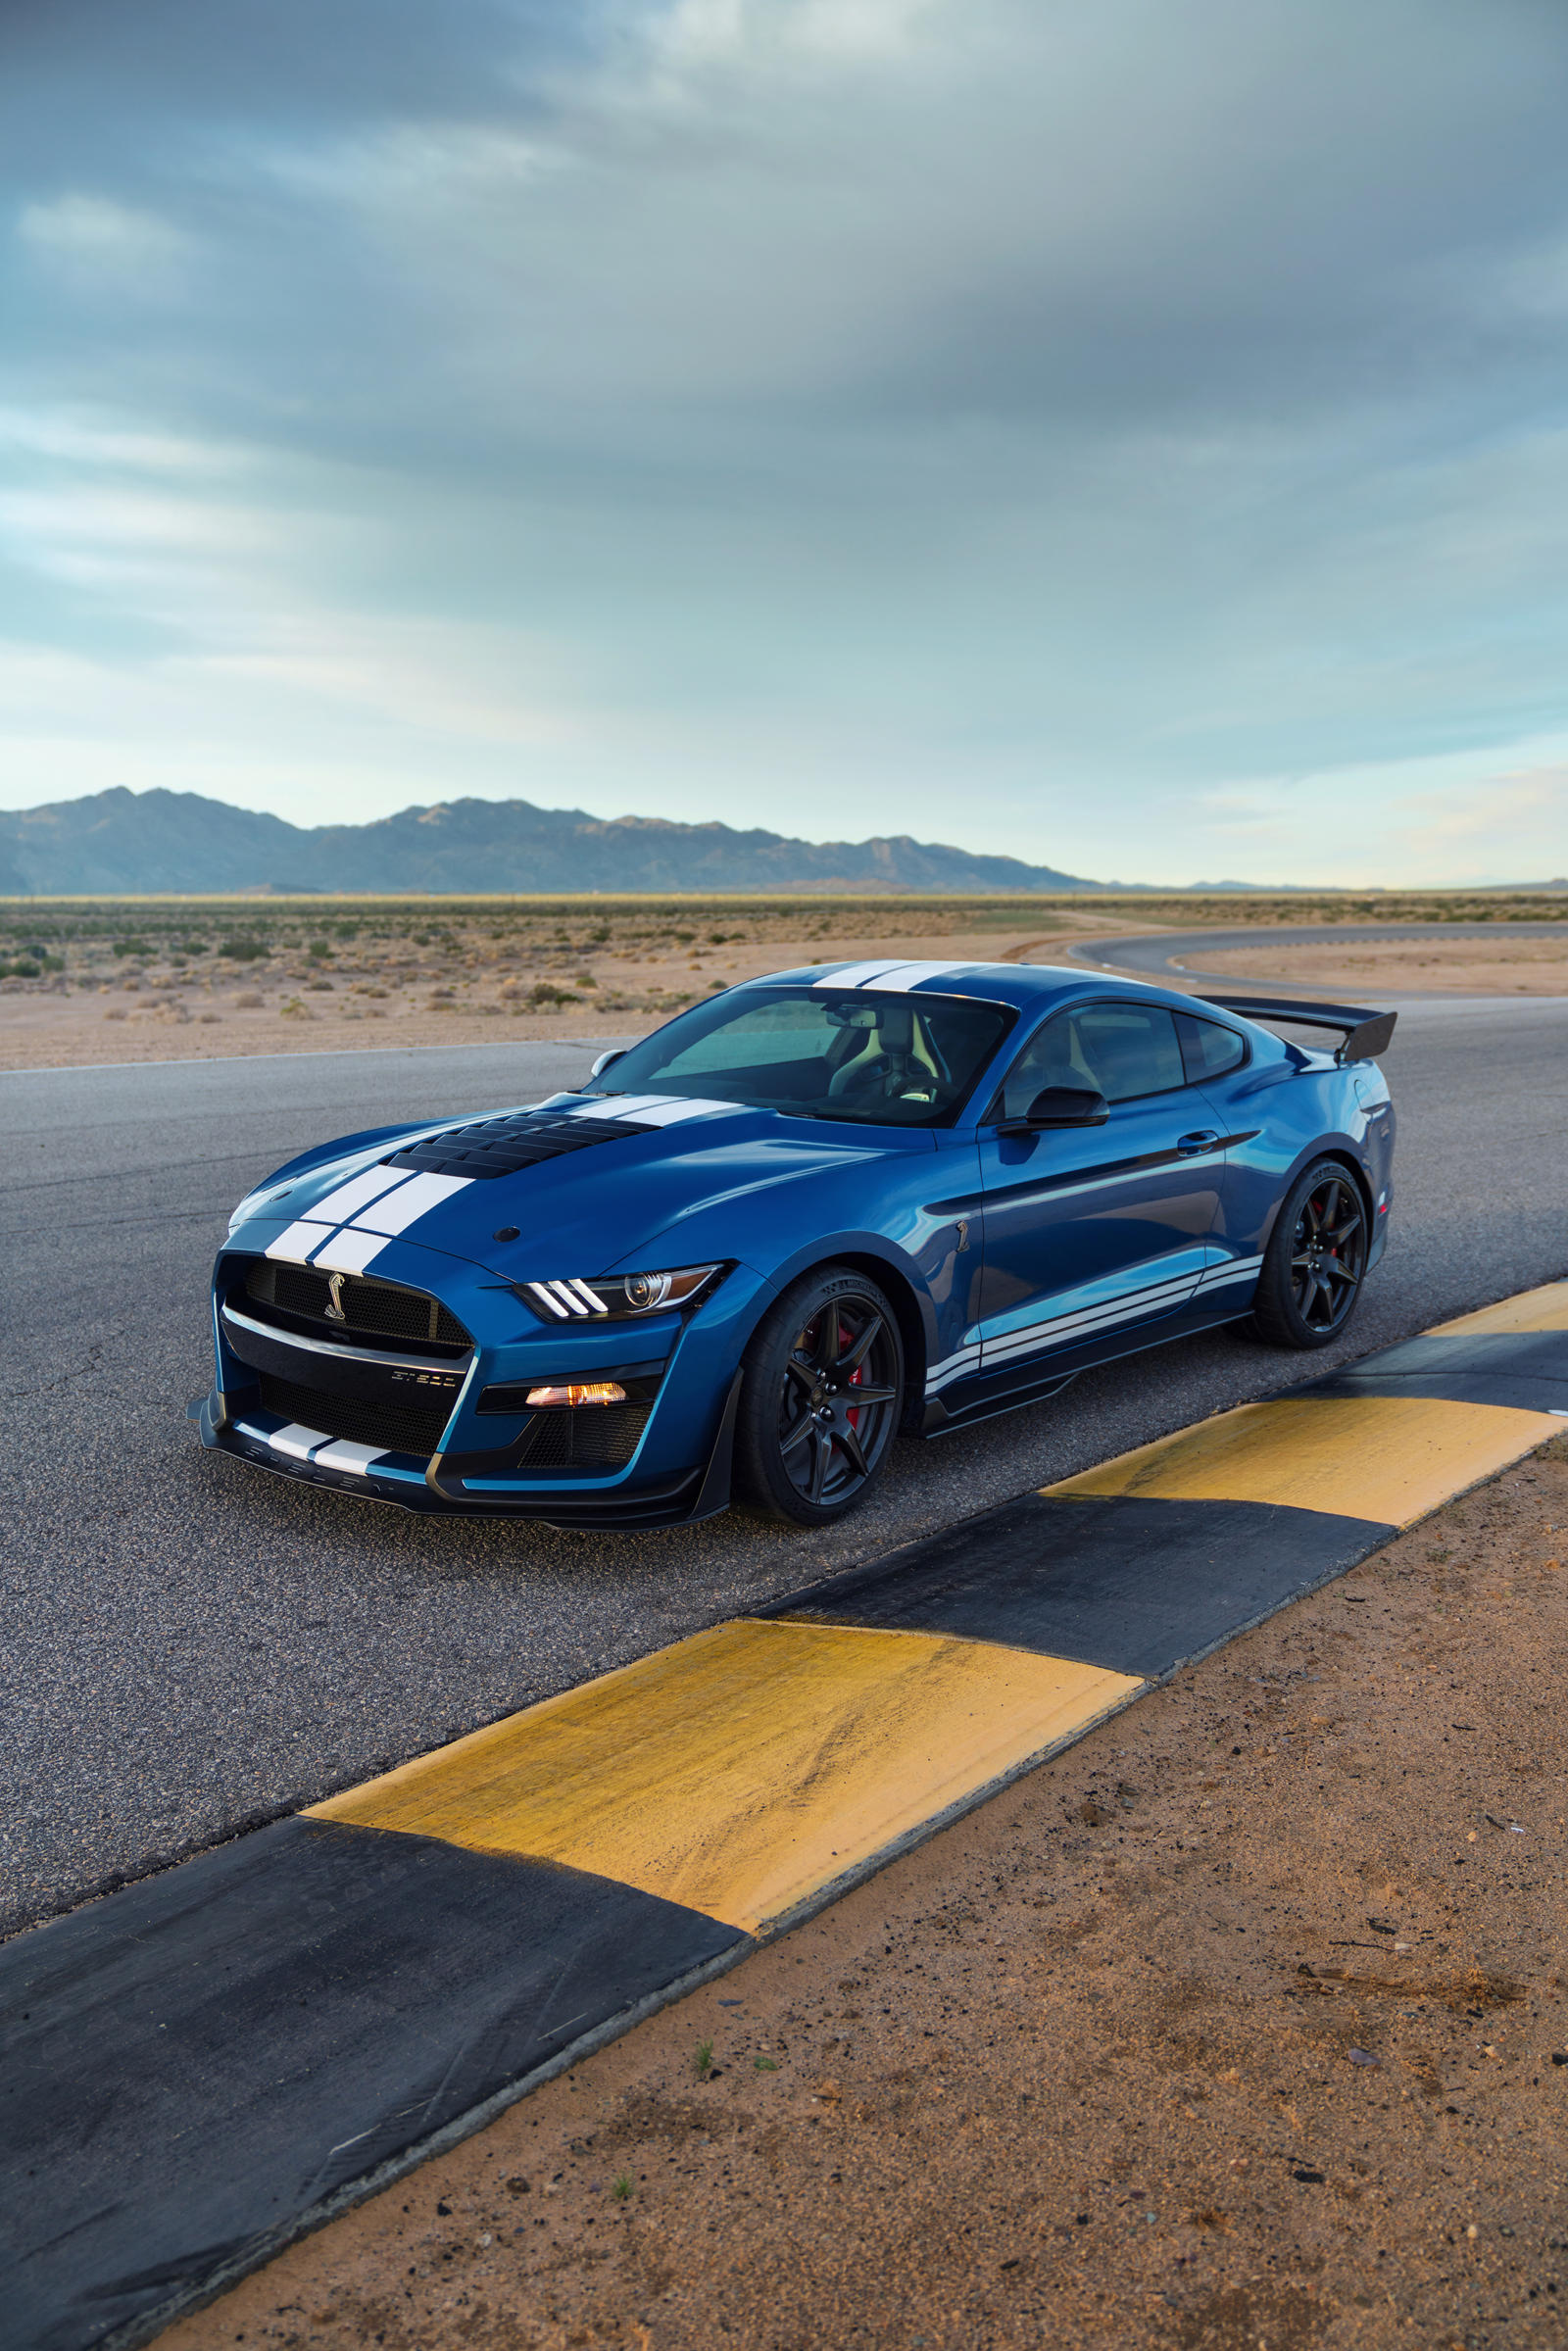 2022 Ford Mustang Shelby GT500 Exterior Dimensions: Colors Options & Accessories